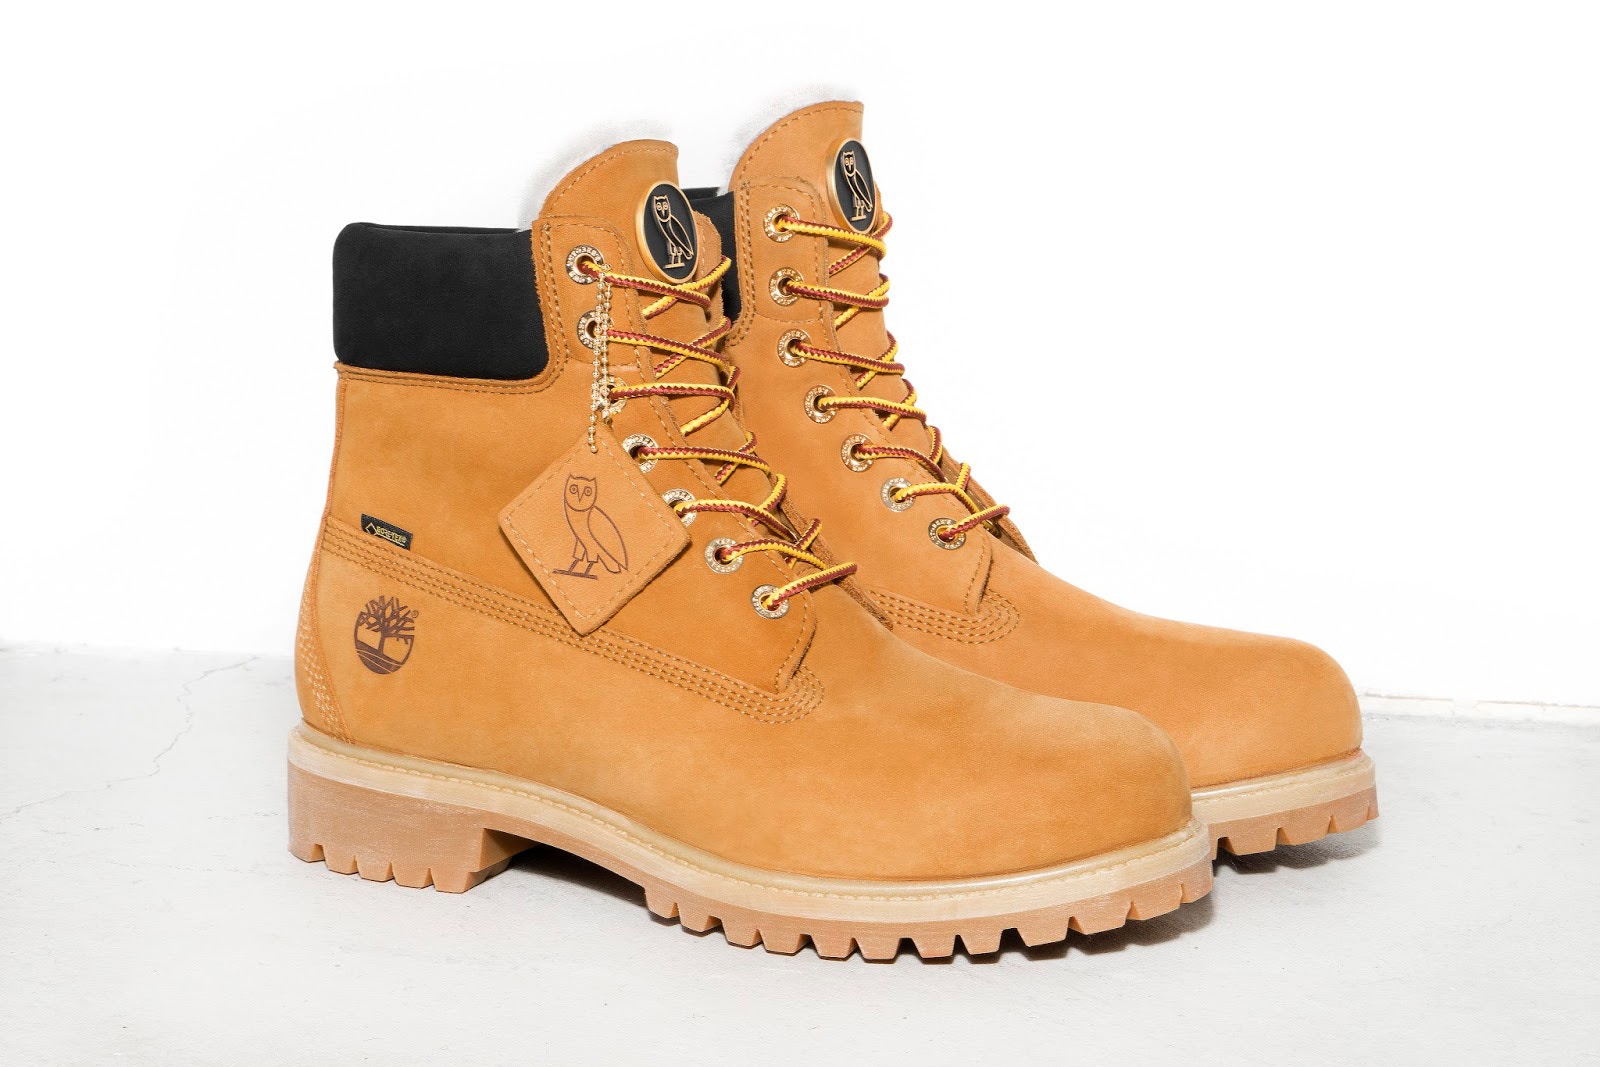 Where And When To Buy The OVO X Timberland 6-Inch Boots